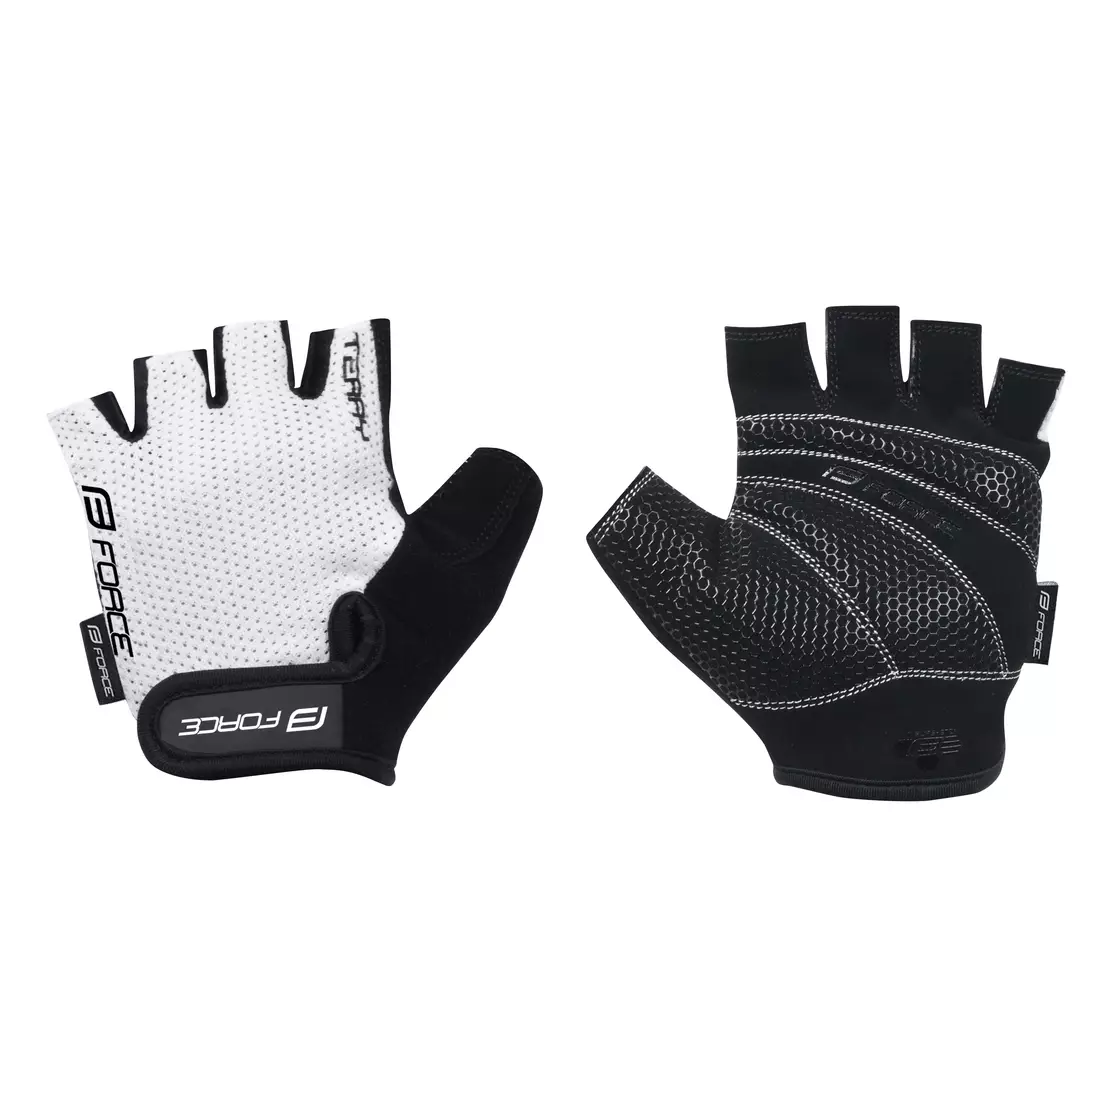 FORCE cycling gloves terry white 90553-XXL